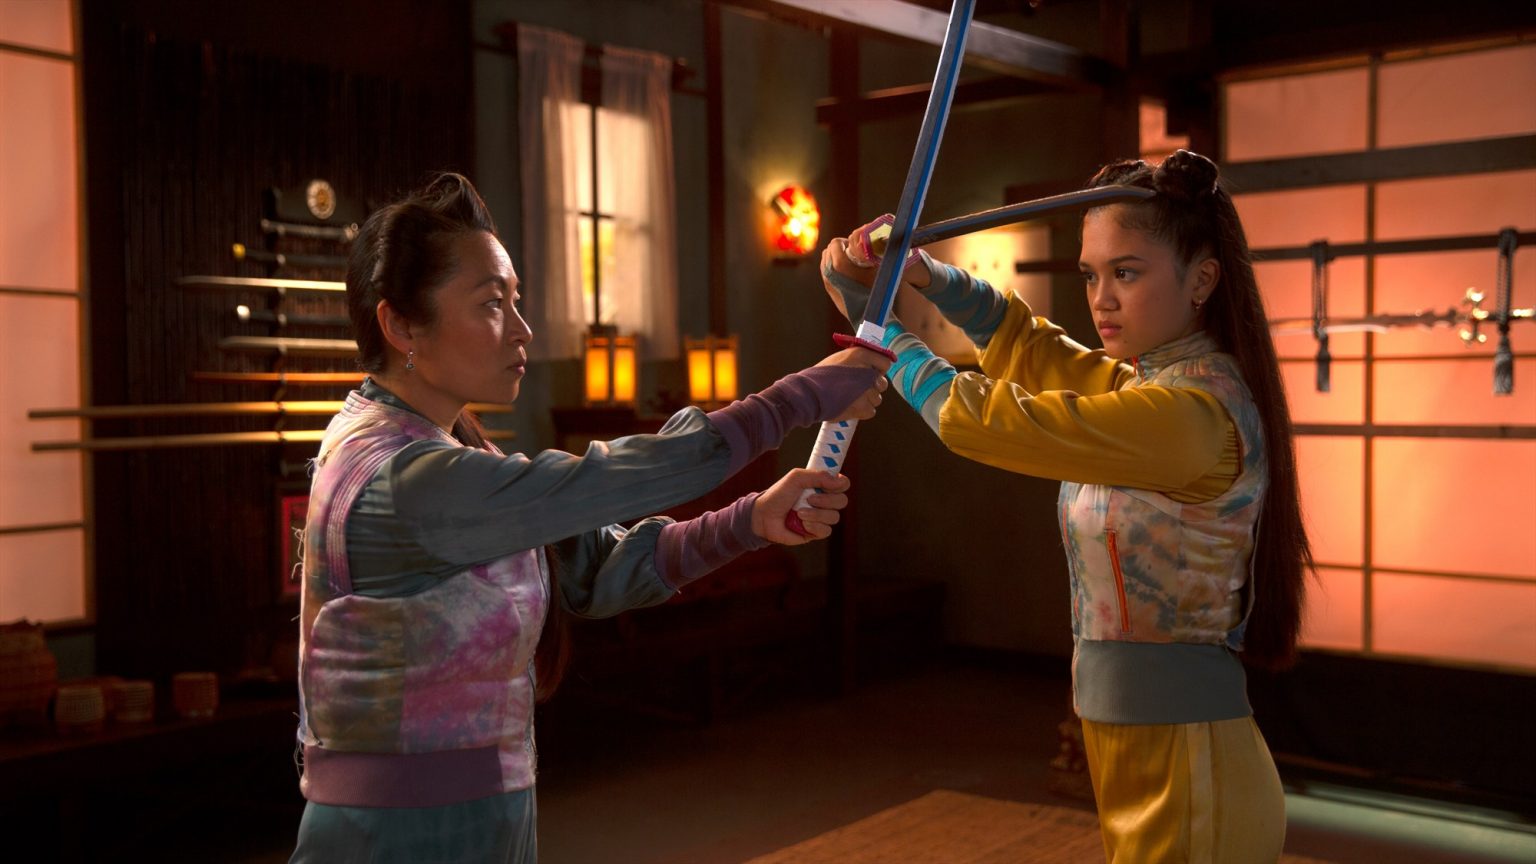 Still from De Piraten van Hiernaast 2. Yuka is training in katana sword fighting with her mom, Mia. The swords are crossed in the middle.